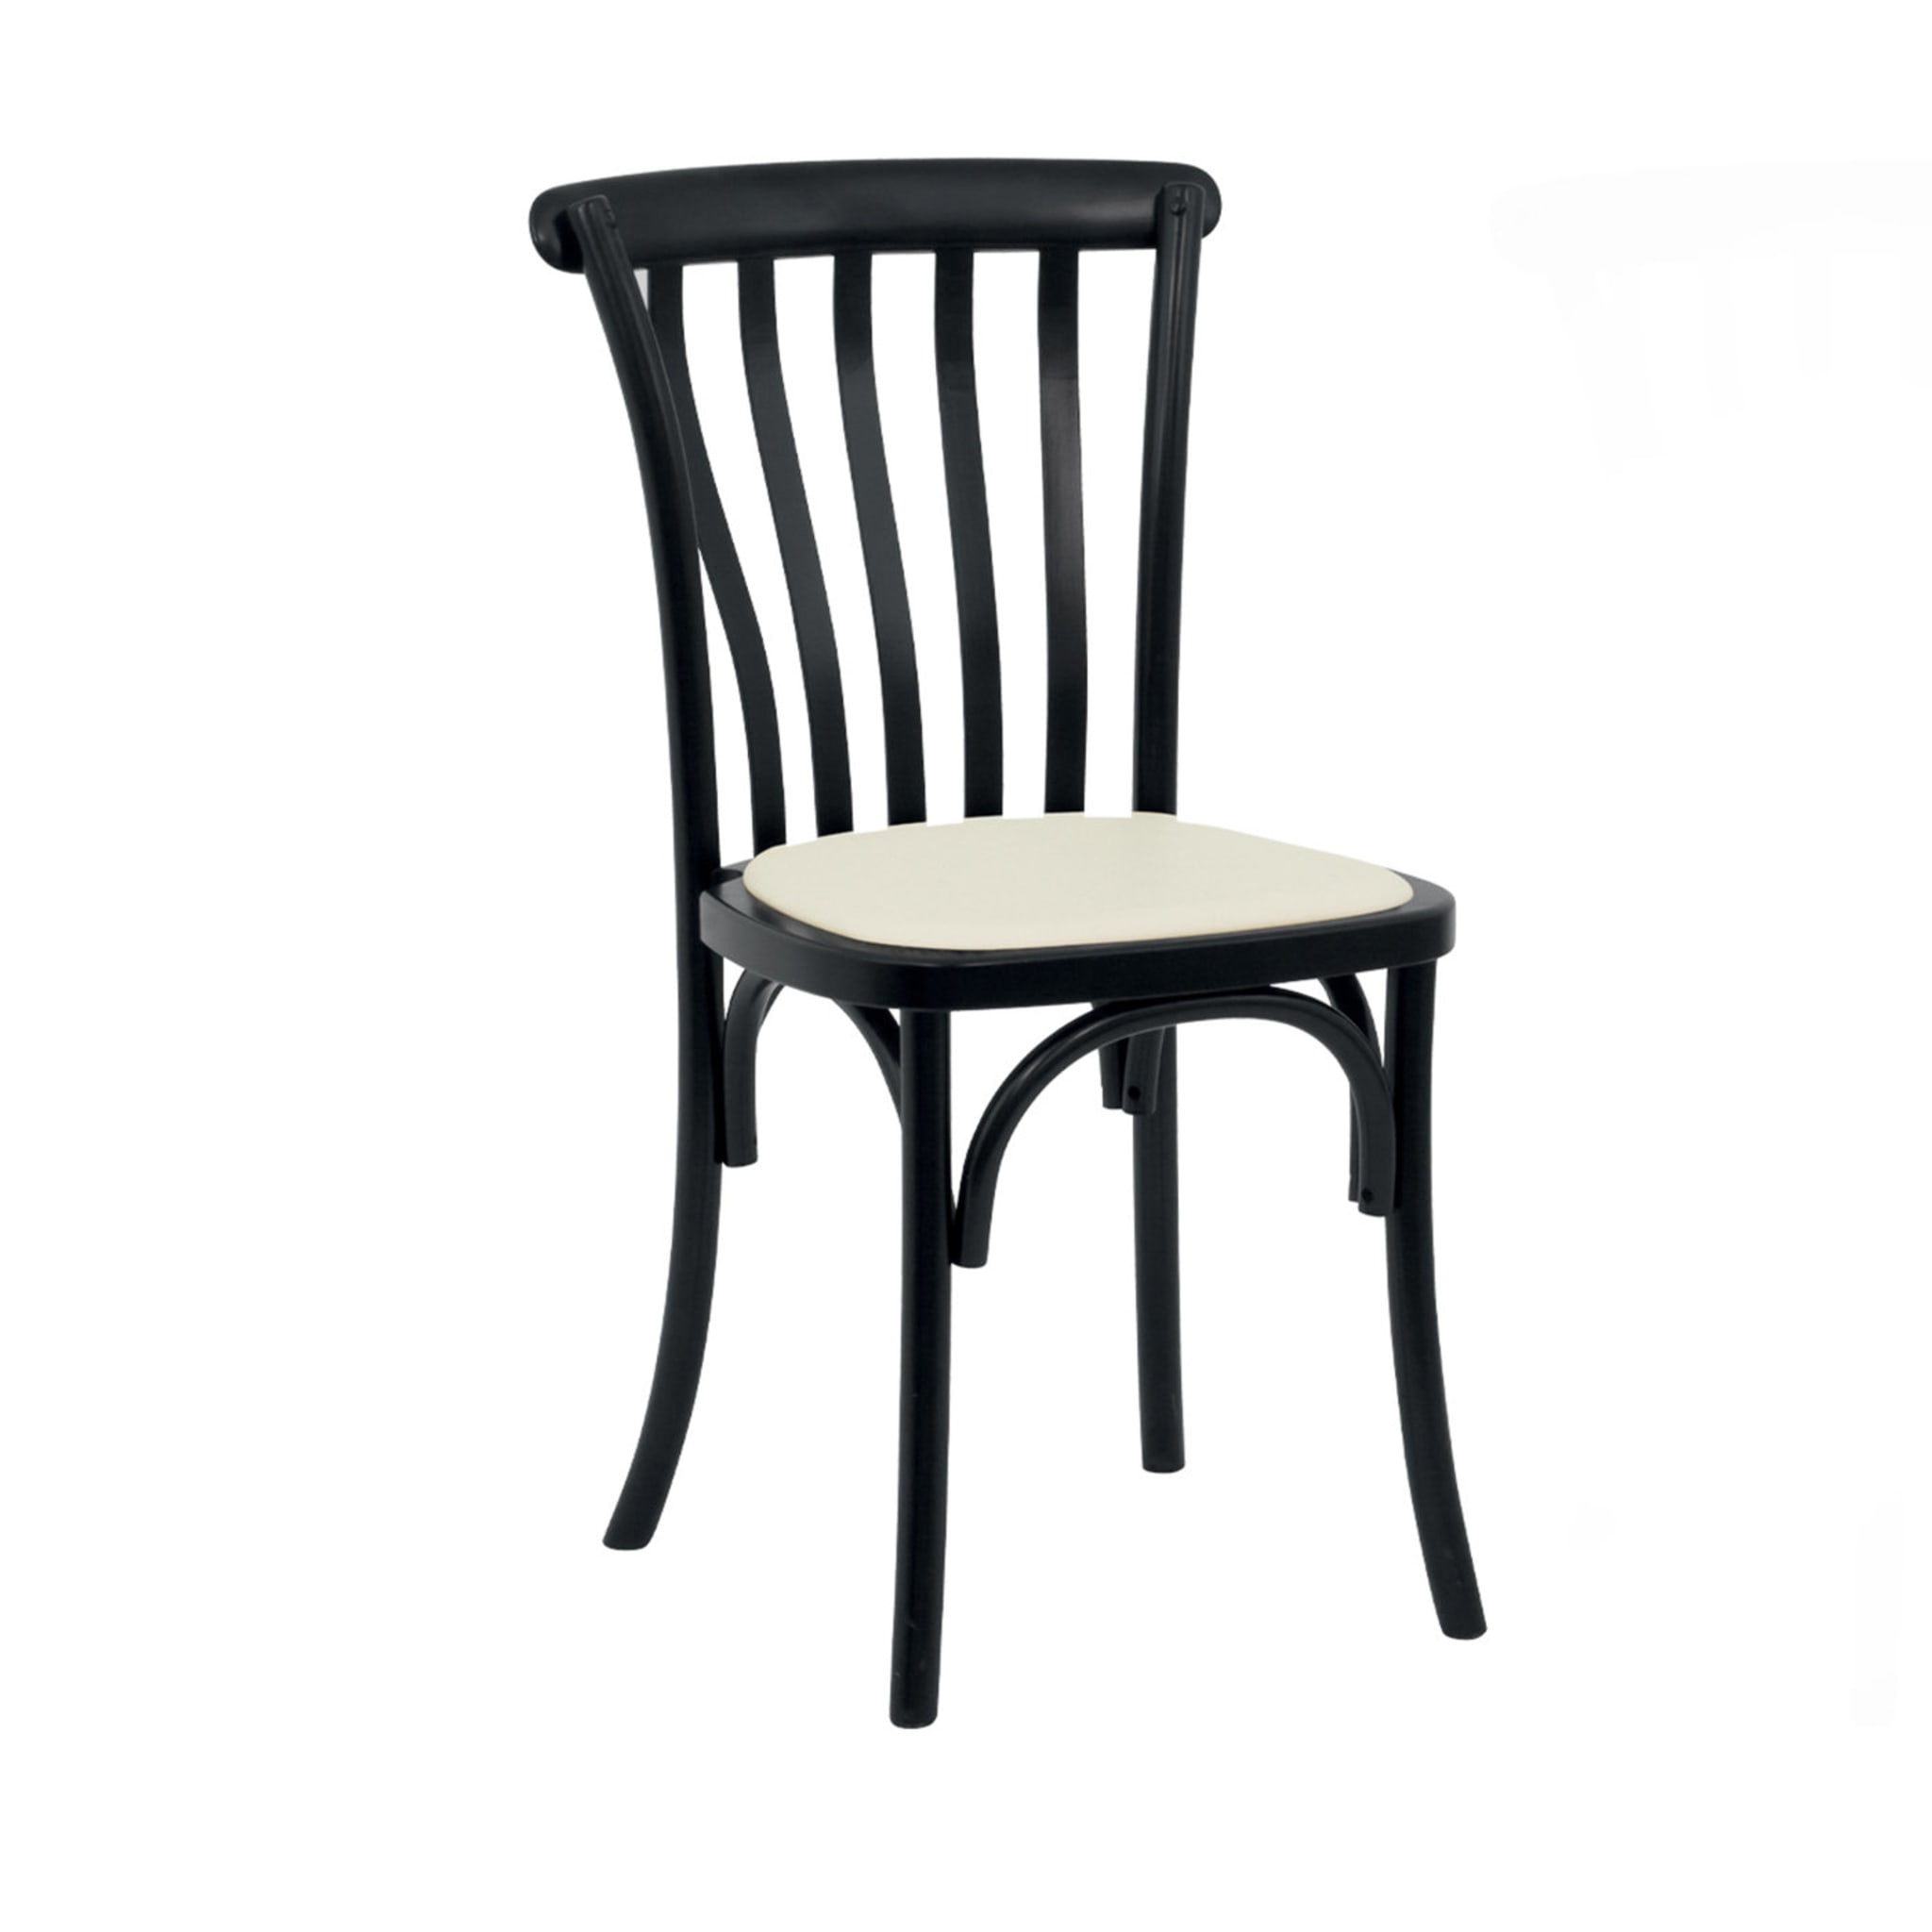 Ciao Cividale Set of 2 Black Chairs - Main view